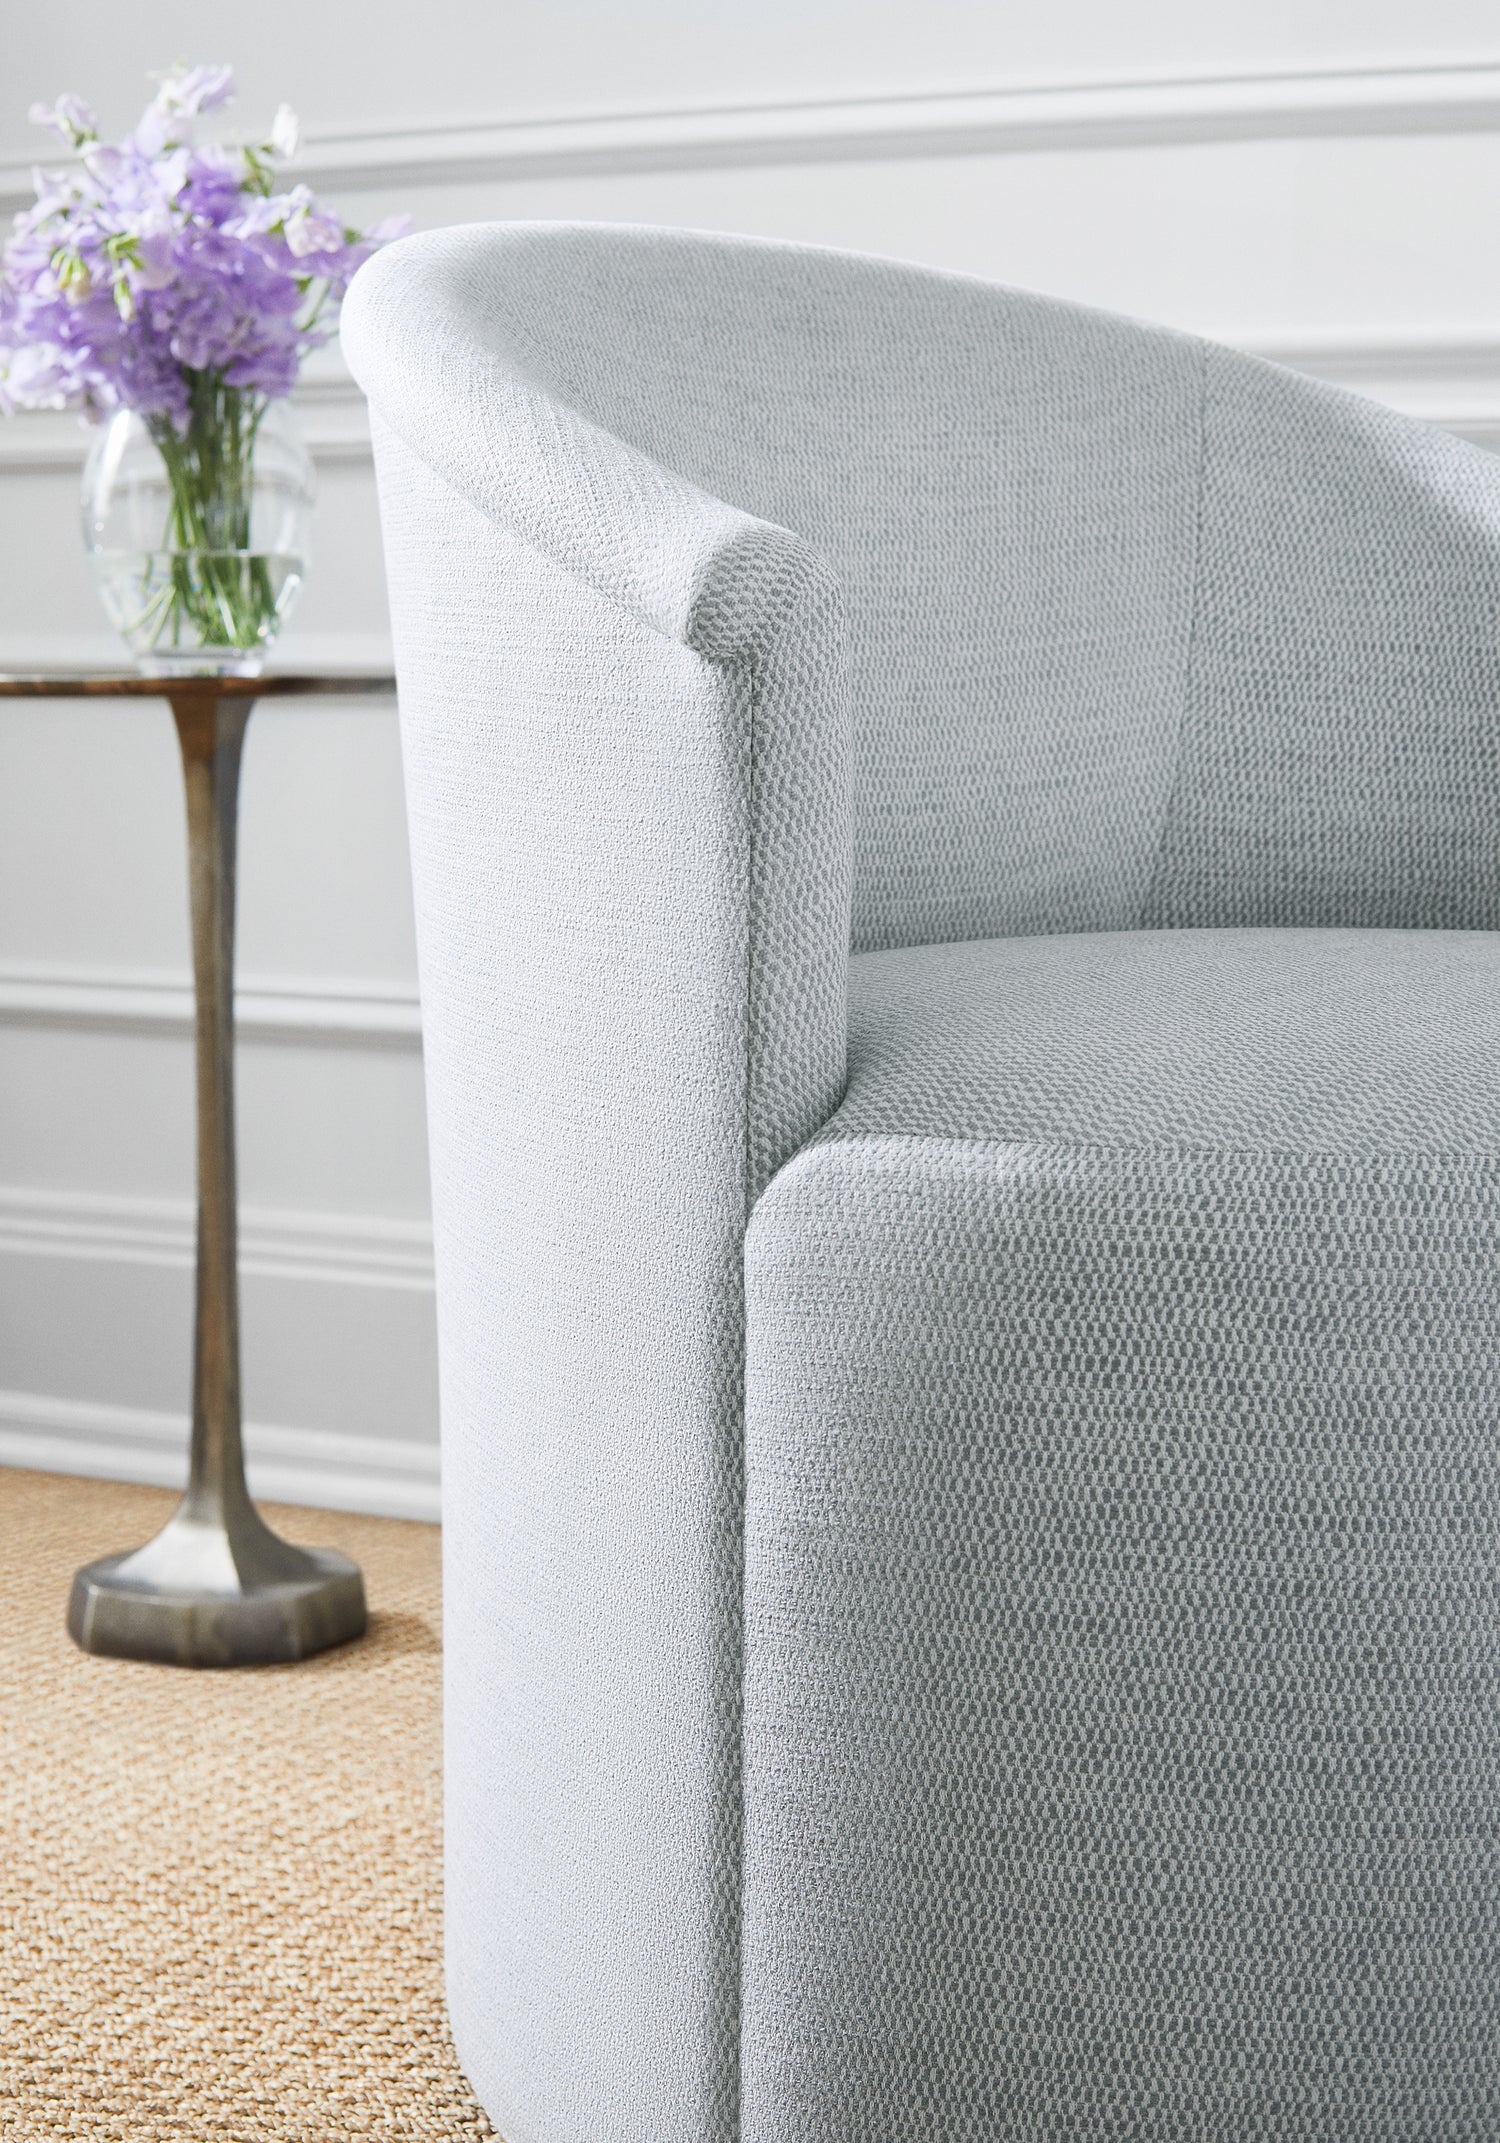 Detailed view of Ashby Chair with Swivel in Rito woven fabric in fog color - pattern number W8116 by Thibaut in the Sereno collection